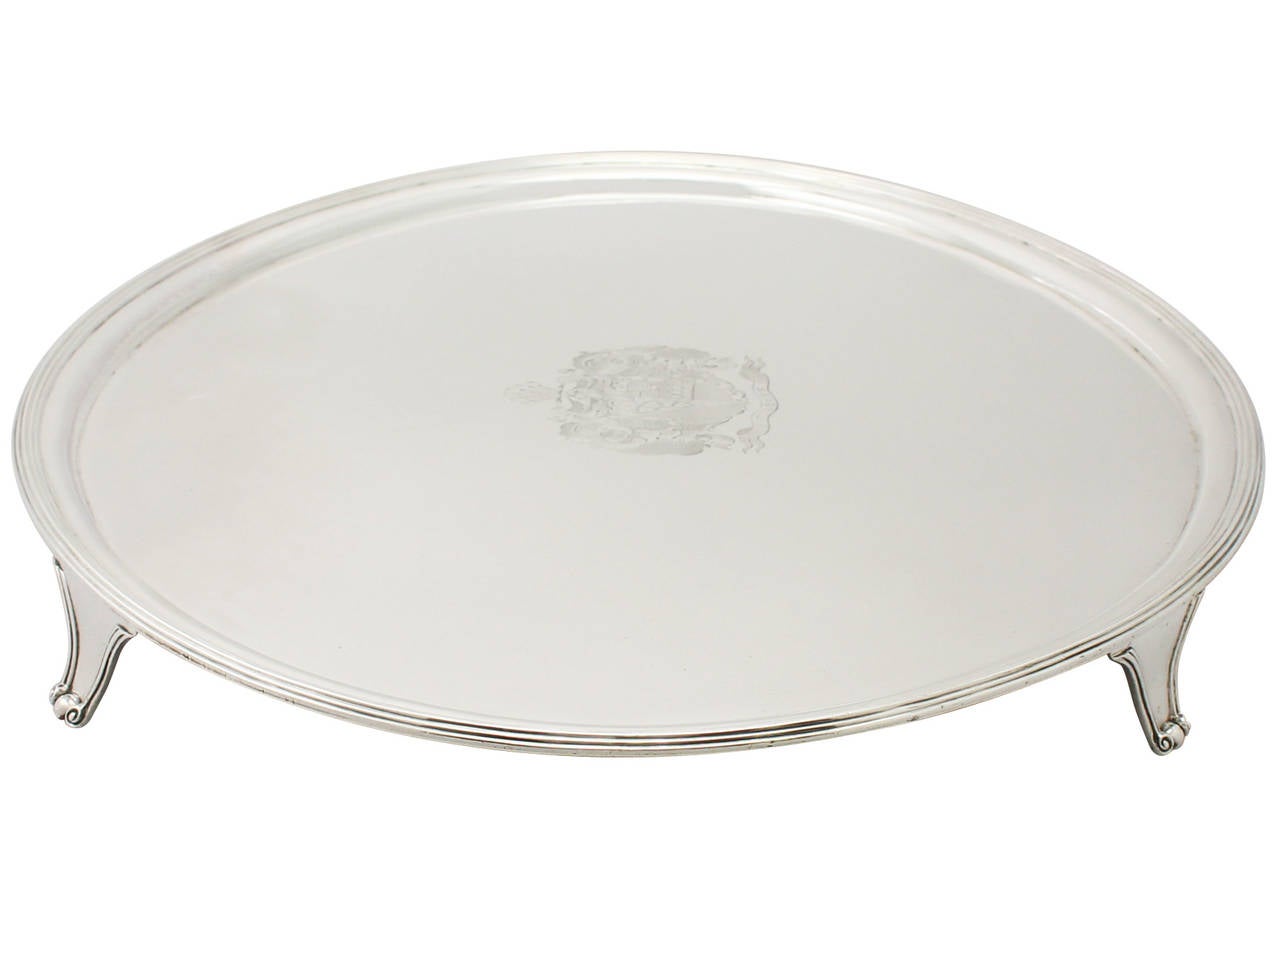 A magnificent, fine and impressive, large antique George III English sterling silver salver; an addition to our Georgian silverware collection

This magnificent and large antique George III sterling silver salver has a plain oval form onto four